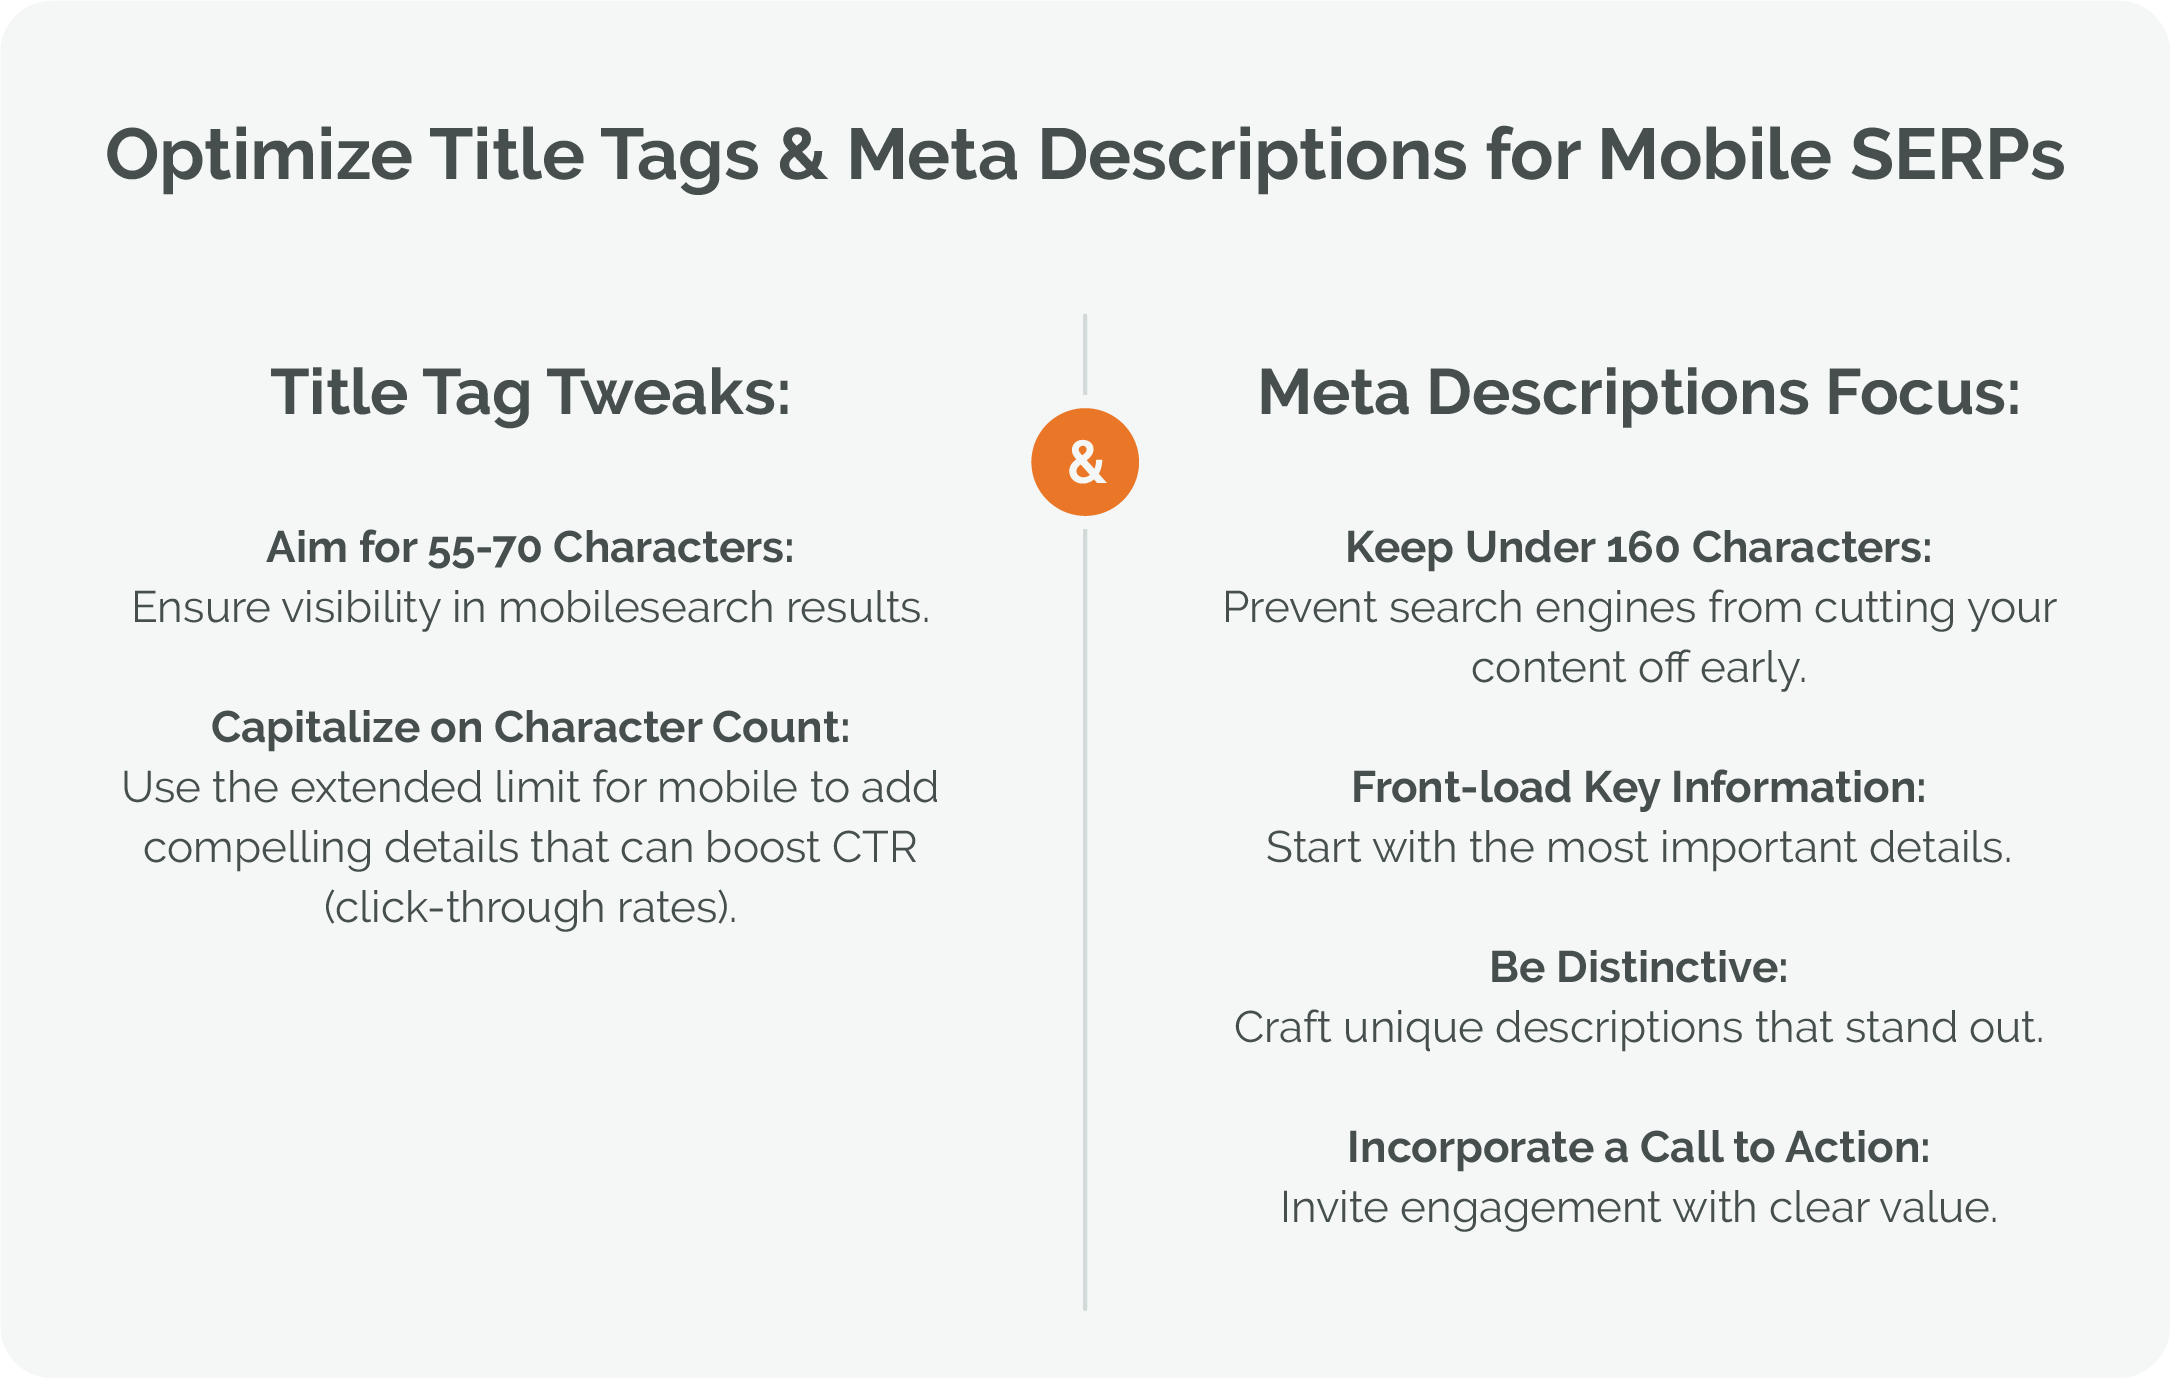 Optimize Title Tags and Meta Descriptions for Mobile SERPs